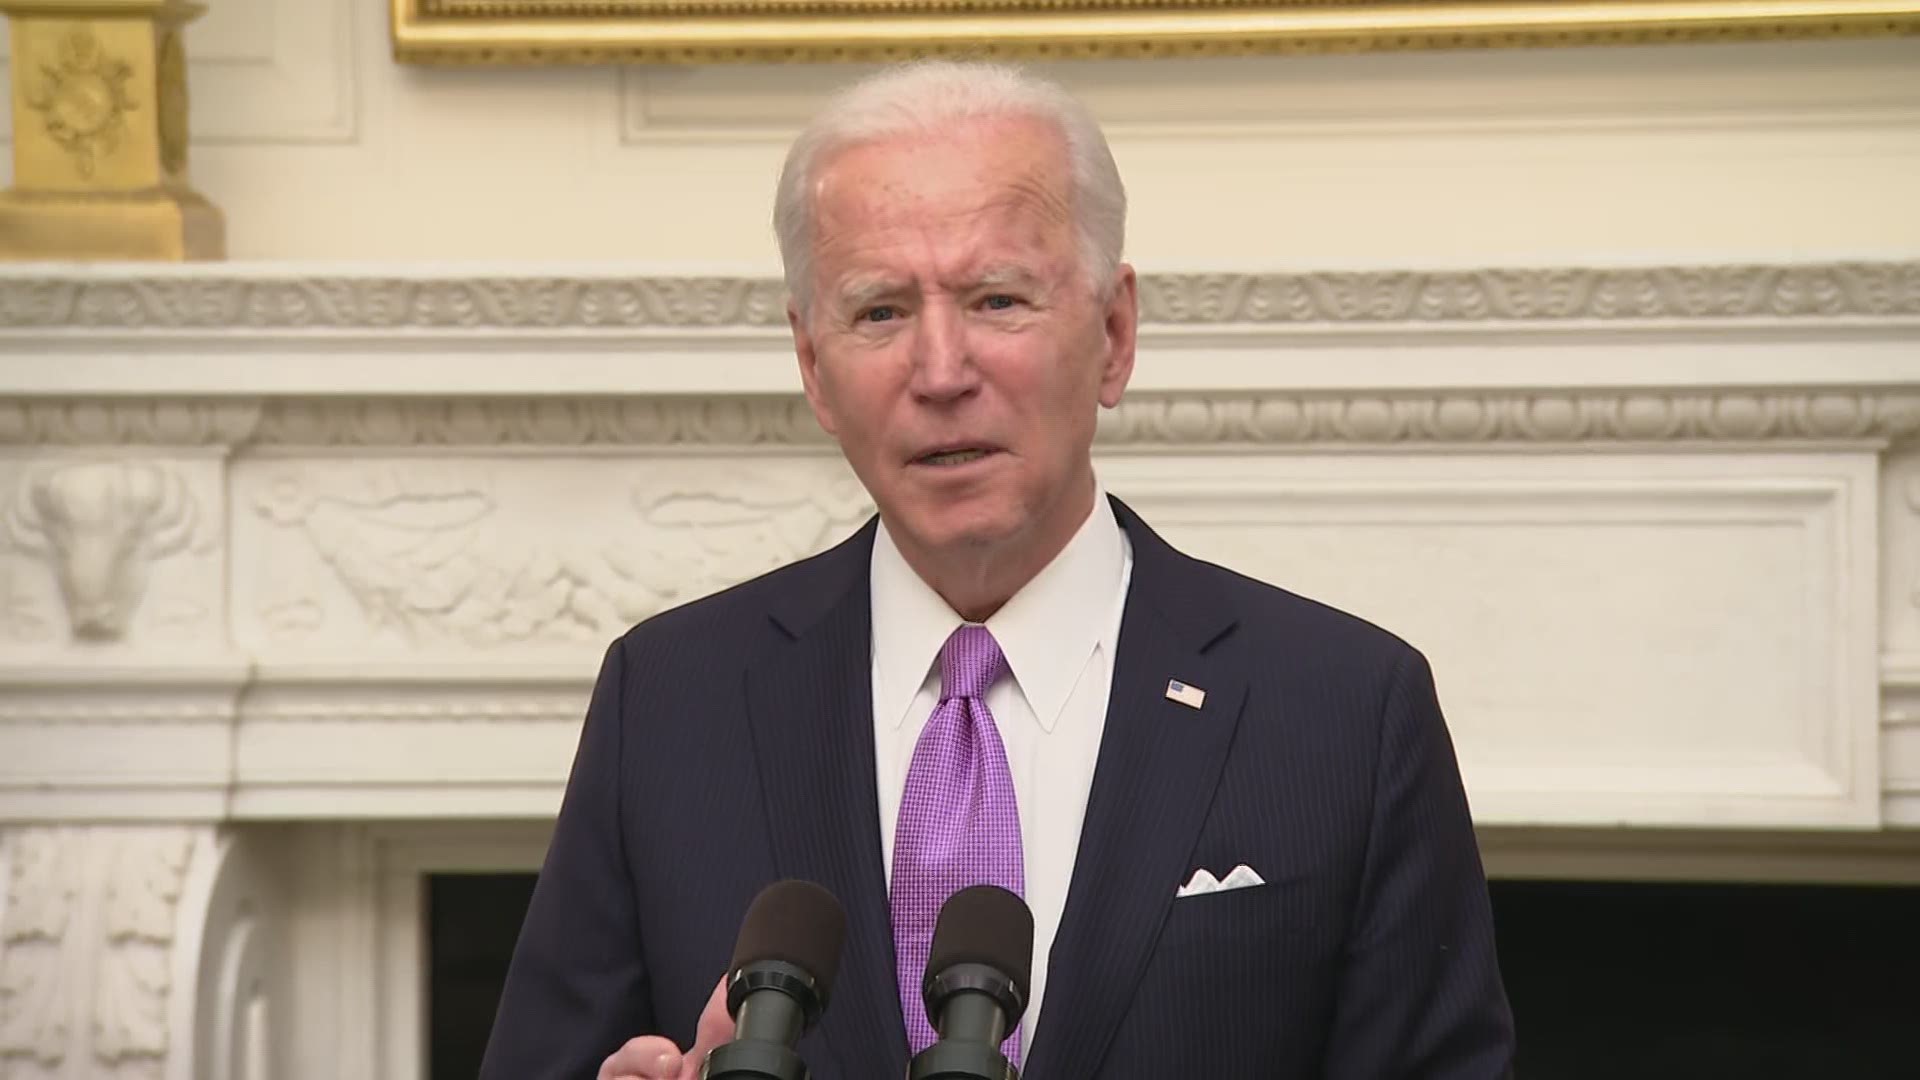 On his first full day in office, President Biden said he'll be implementing the defense production act to get supplies for coronavirus response.